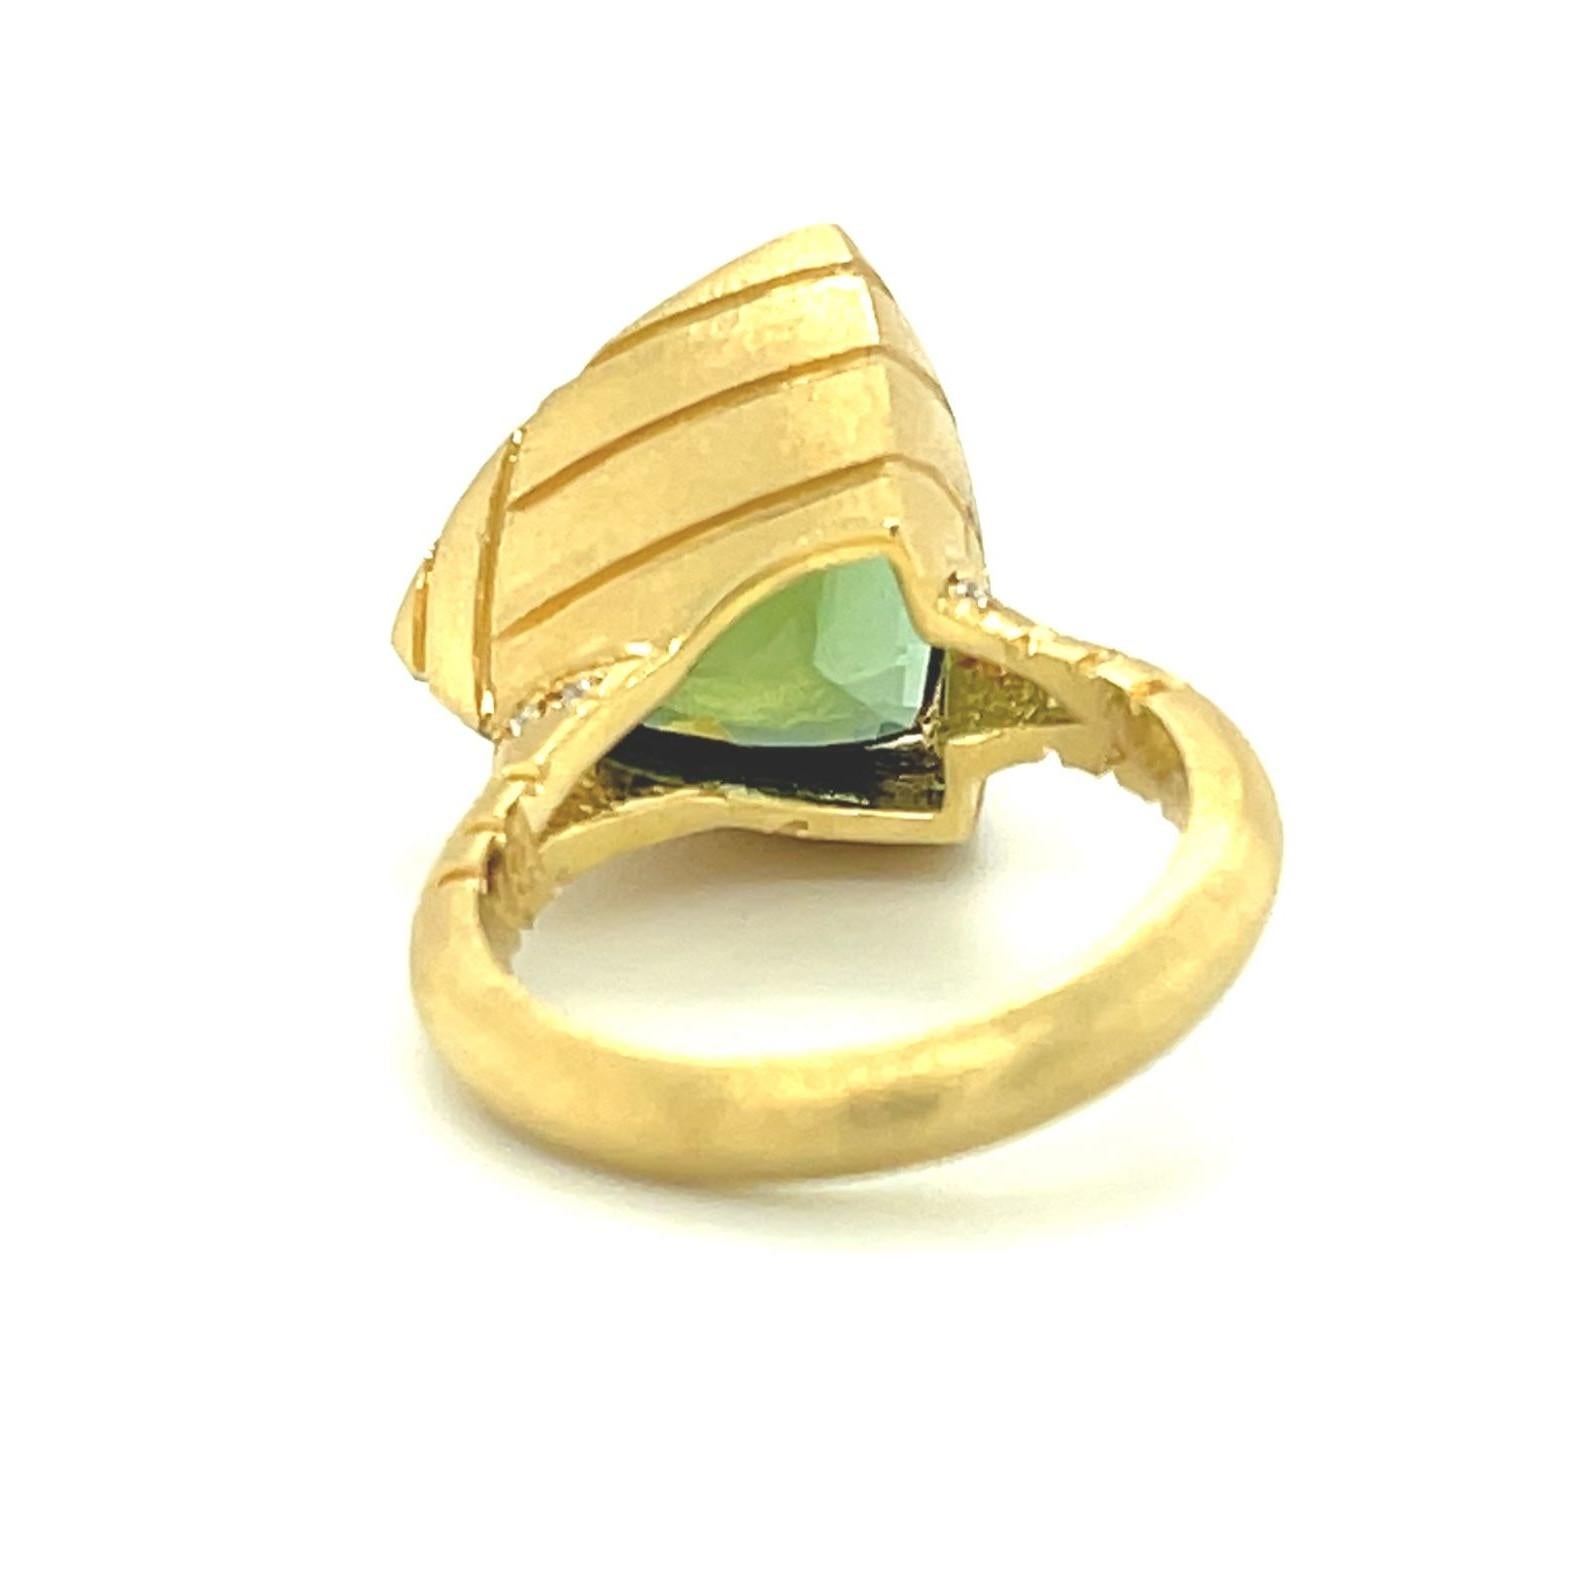 Cushion Cut Trillion Shape Green Tourmaline and Diamond Ring in 18k Yellow Gold, 9.92 Carats For Sale